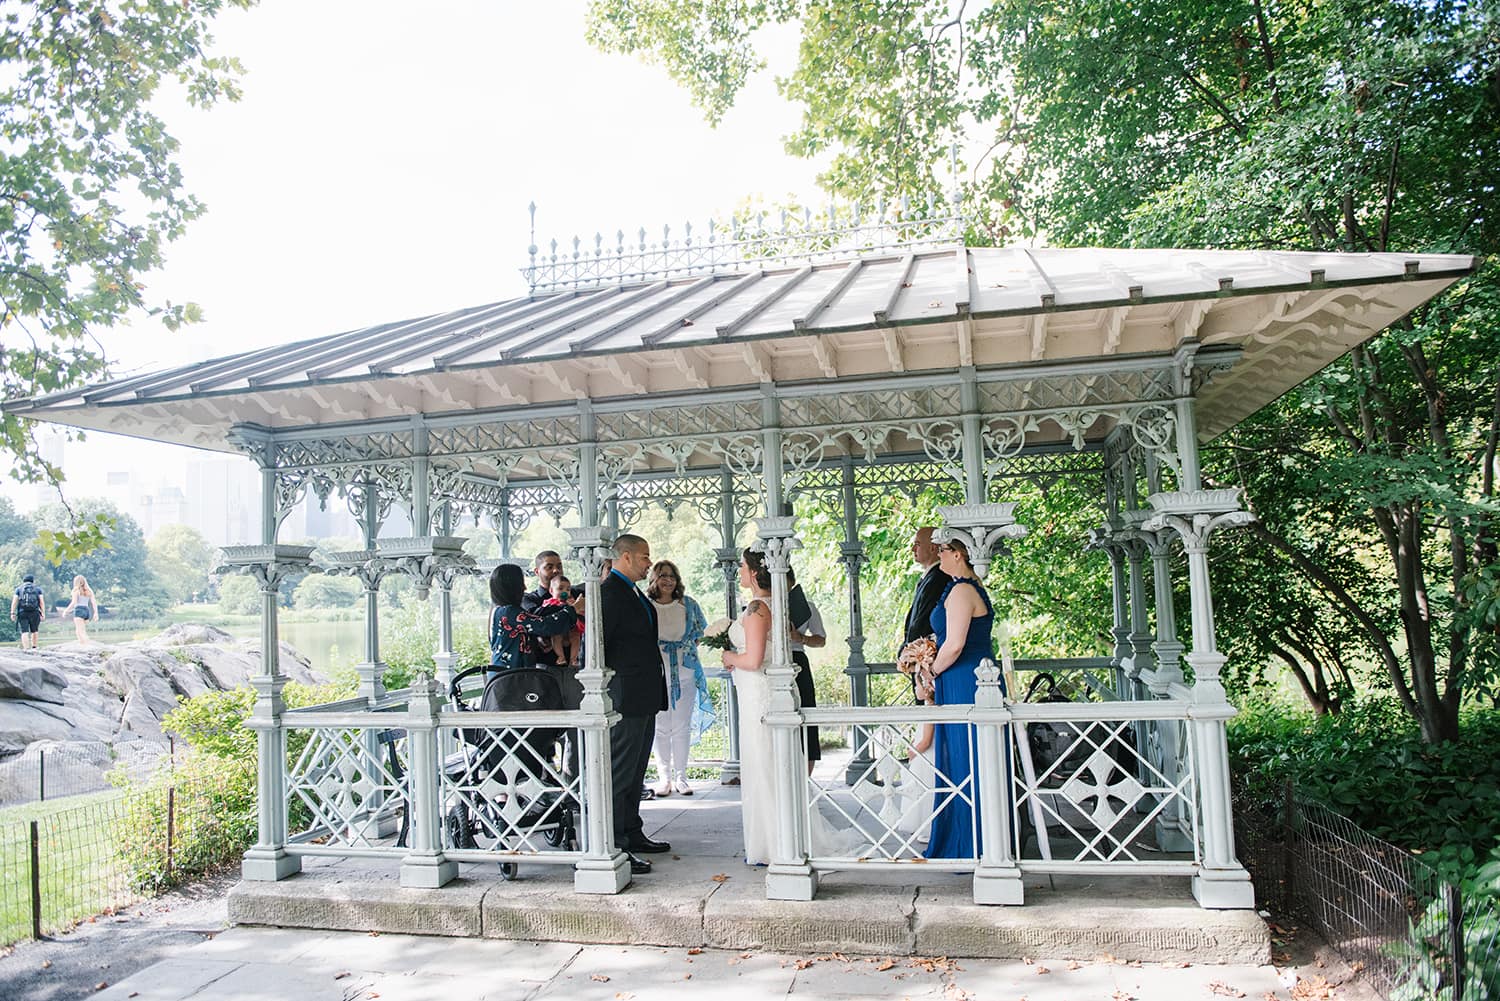 Ladies Pavilion wedding in Central Park, NYC